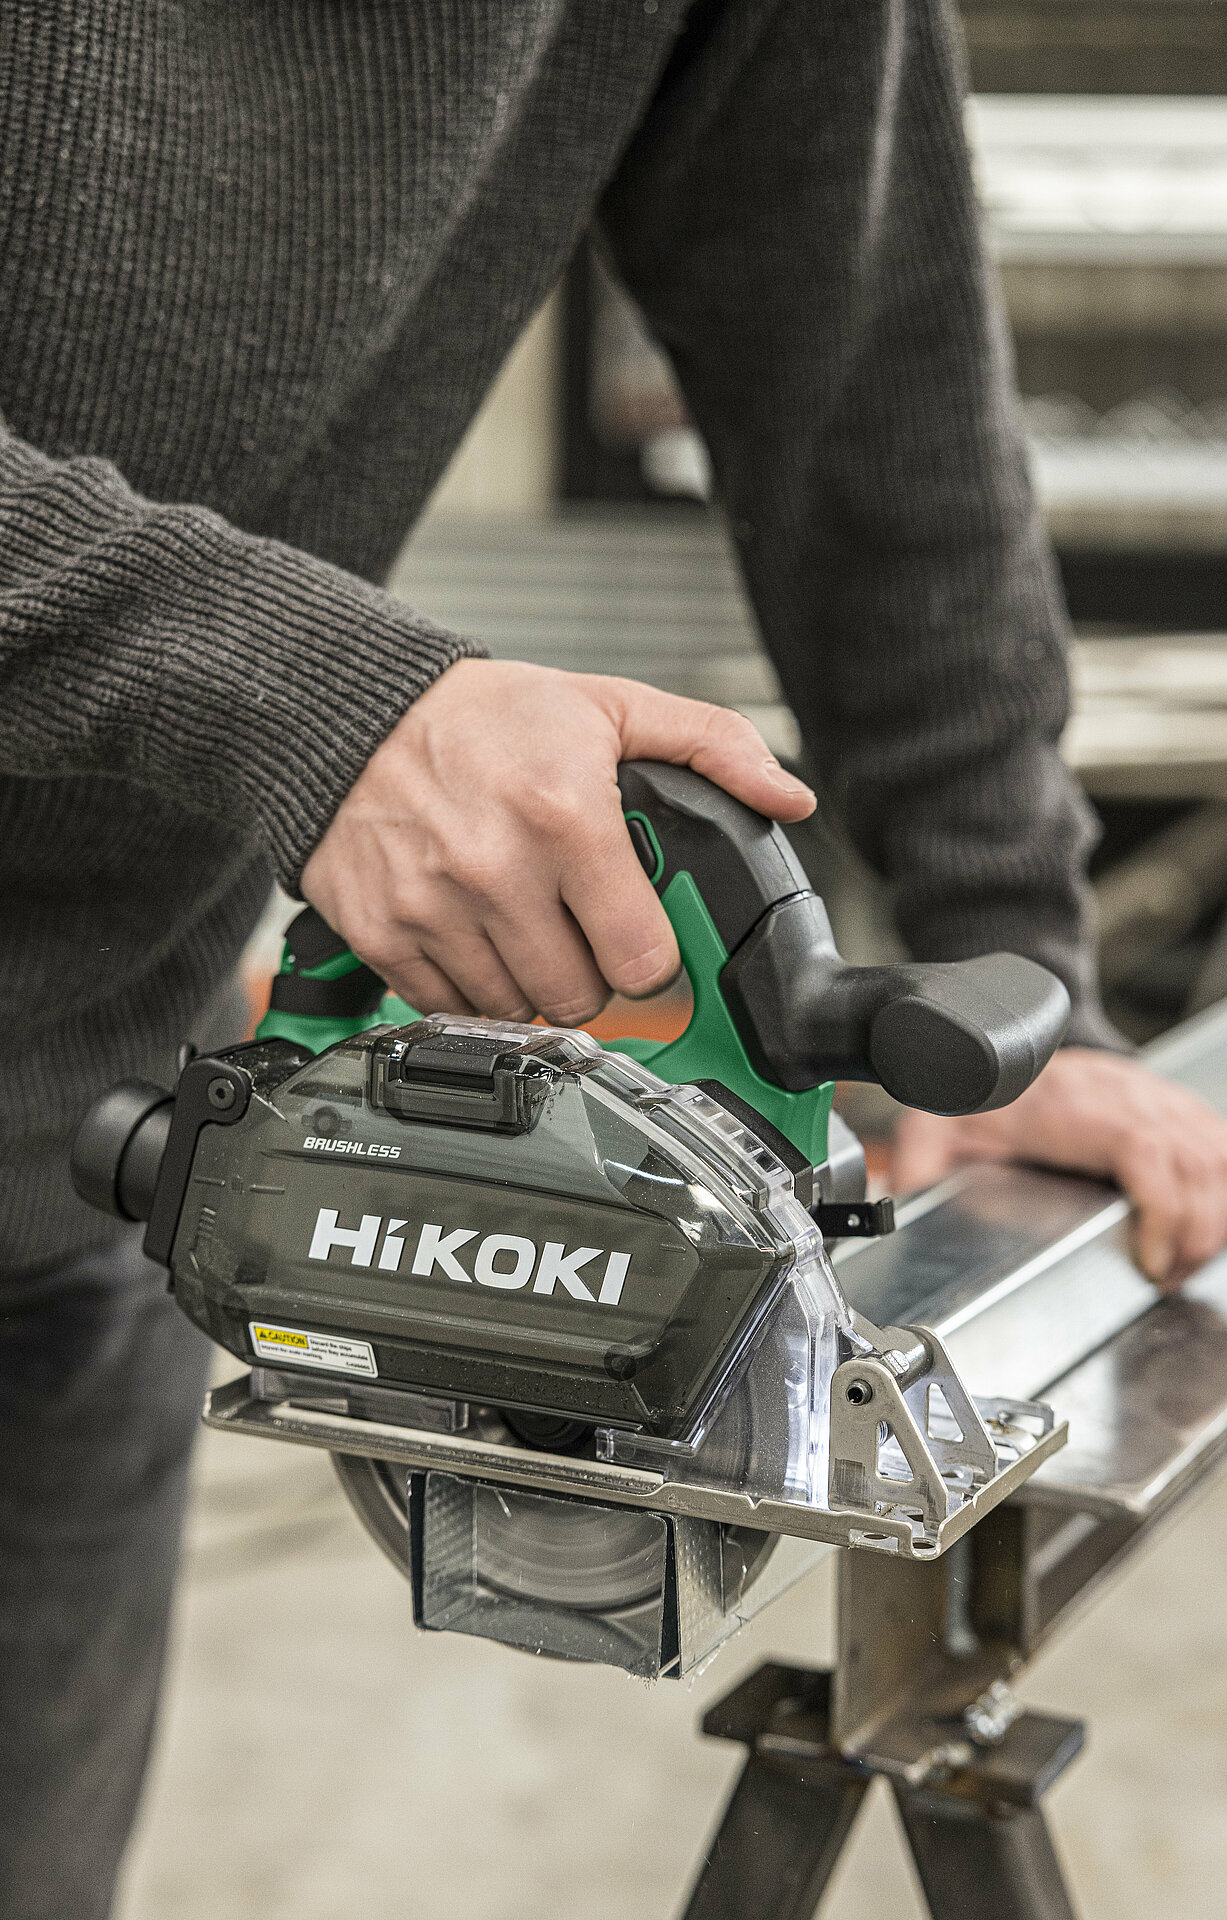 The CD3605DB cordless metal circular saw from HiKOKI is the fastest in its class